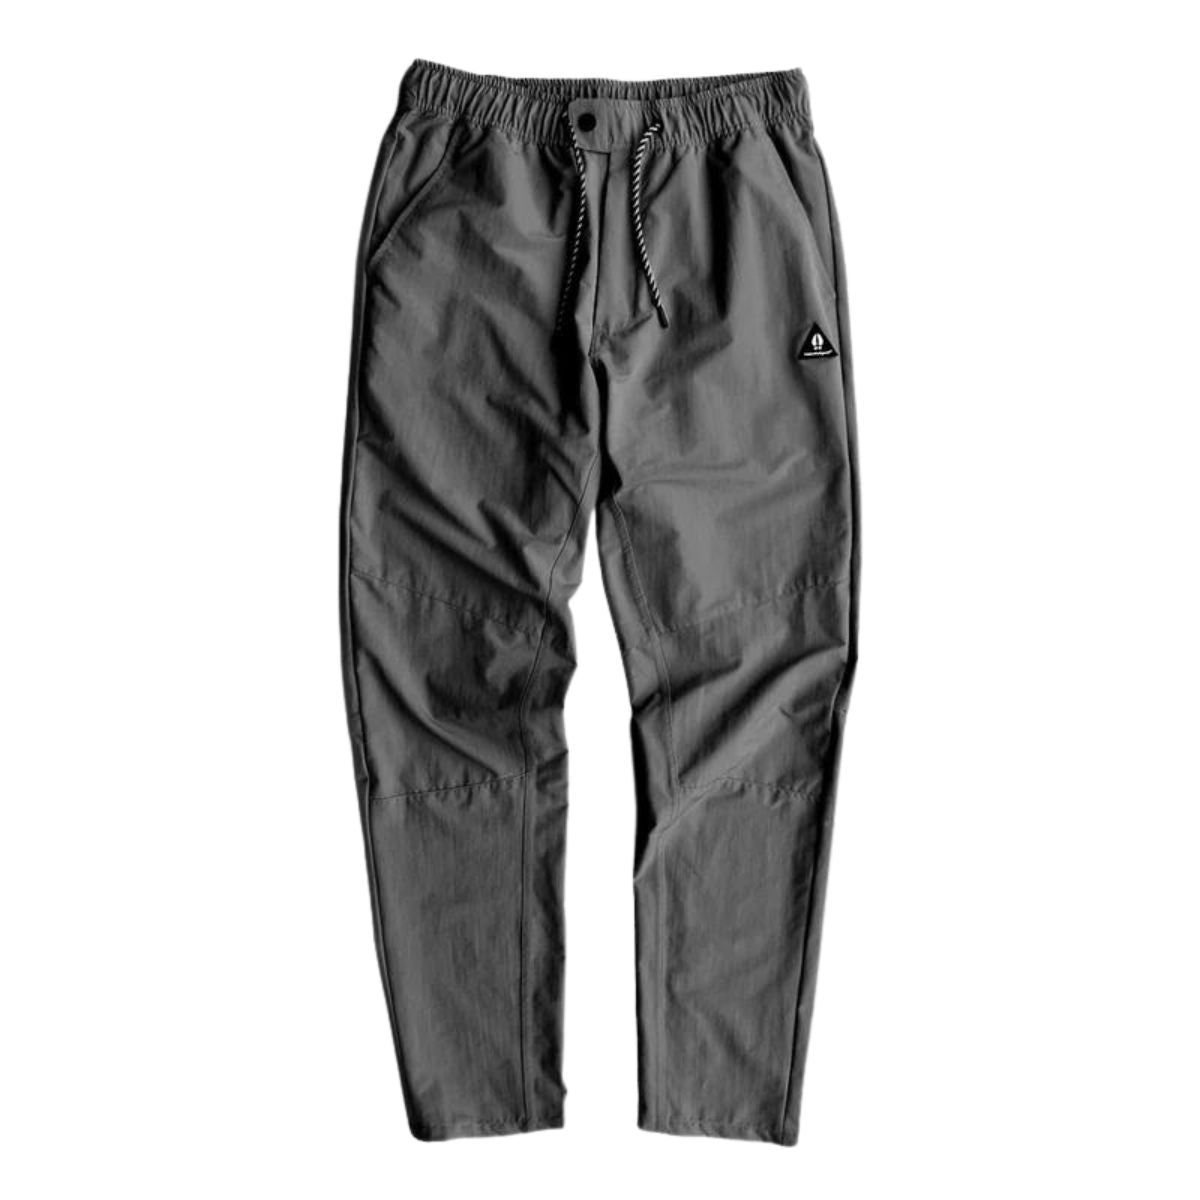 Bearded Goat Apparel - Our new Rover Pant is the beardedgoat take on a  commuter pant that's becoming a staple for so many guys. We made them with  a lightweight, breathable polyester